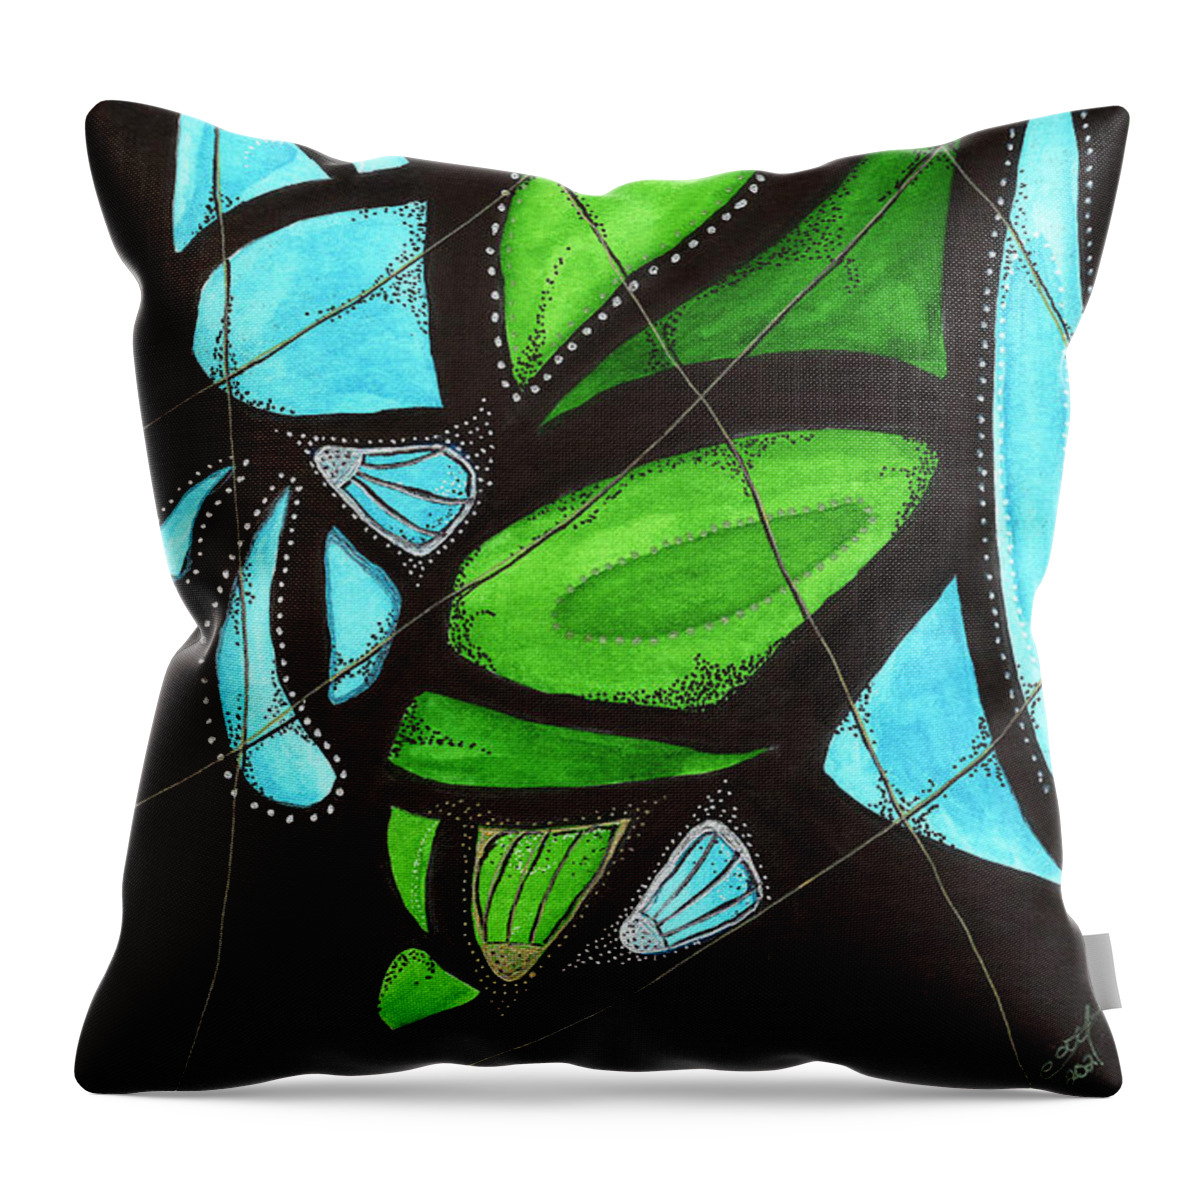 Abstract Throw Pillow featuring the painting Ascendant by Misty Morehead